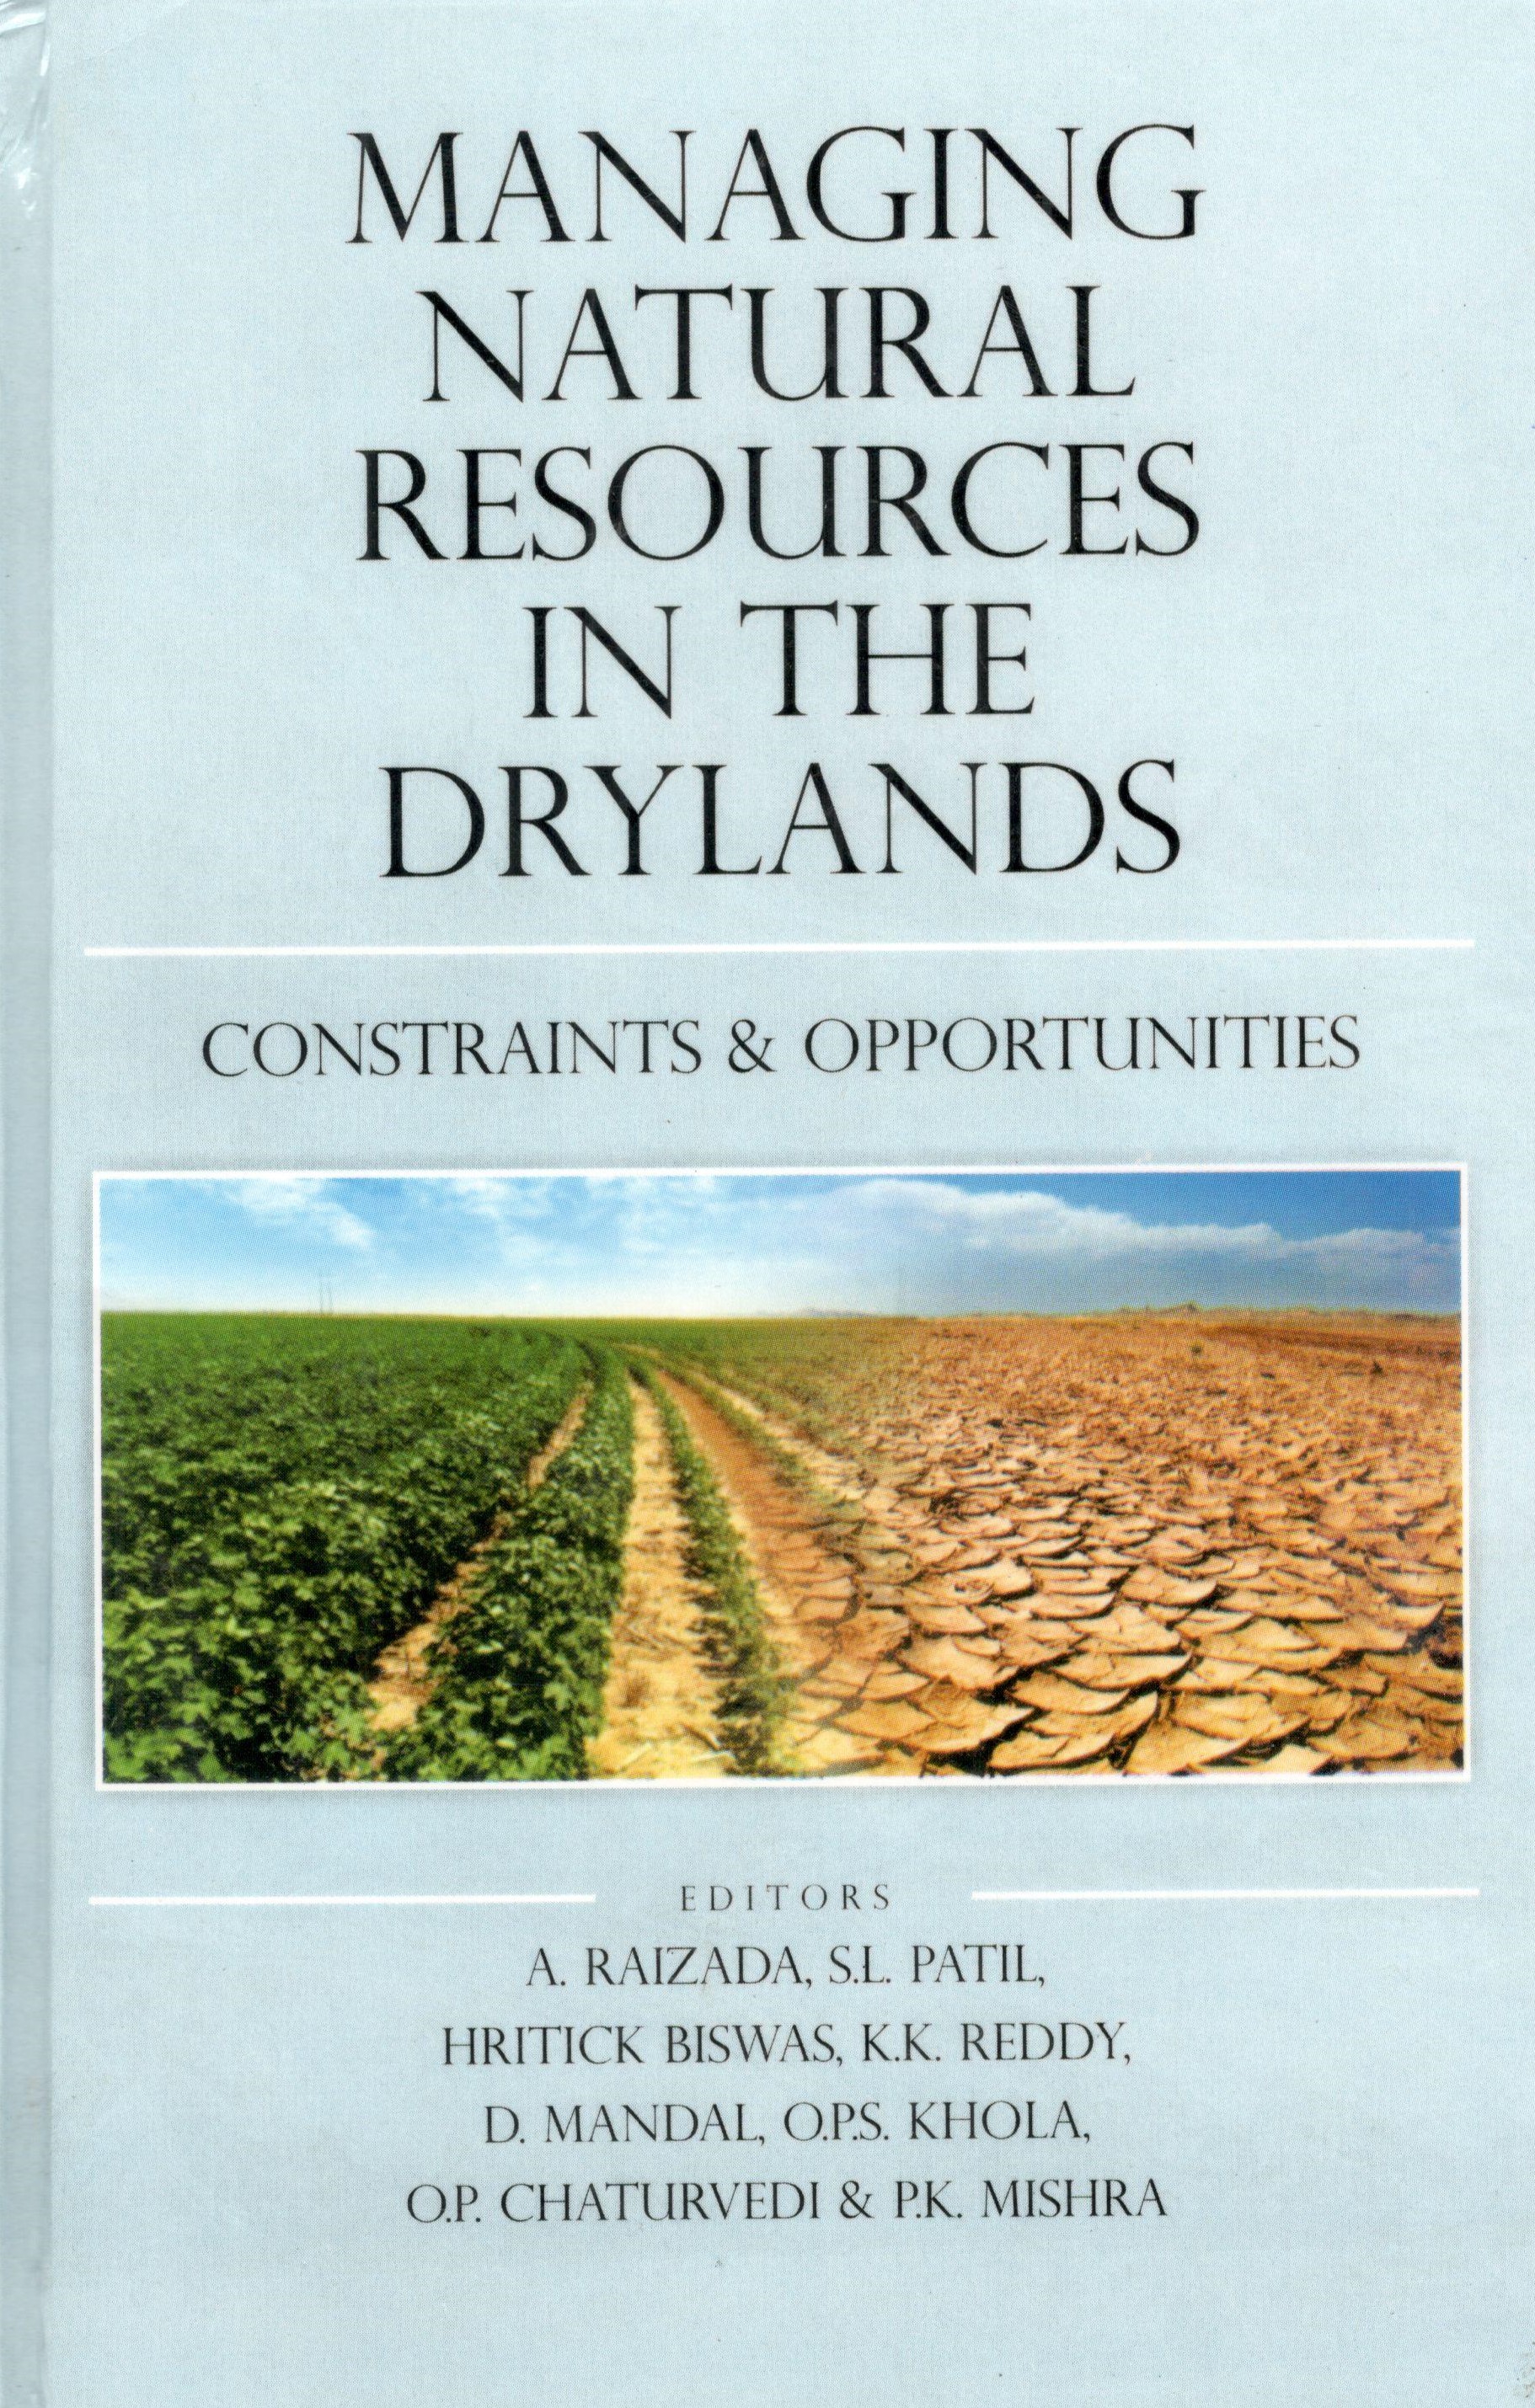 Managing Natural Resources In The Drylands Constraints & Opportunities